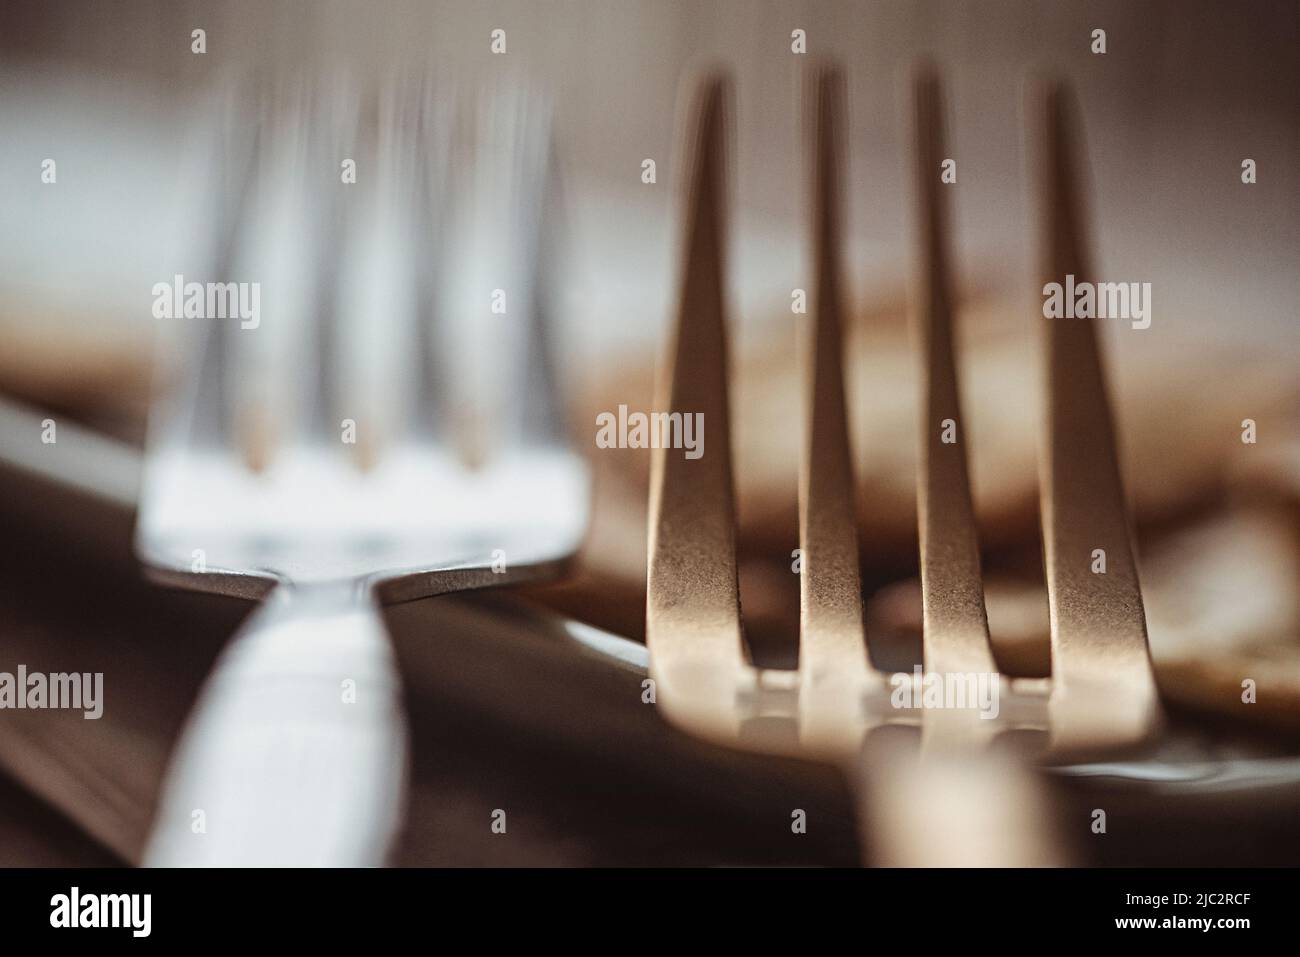 Close-up of two forks leaning on the edge of a plate Stock Photo